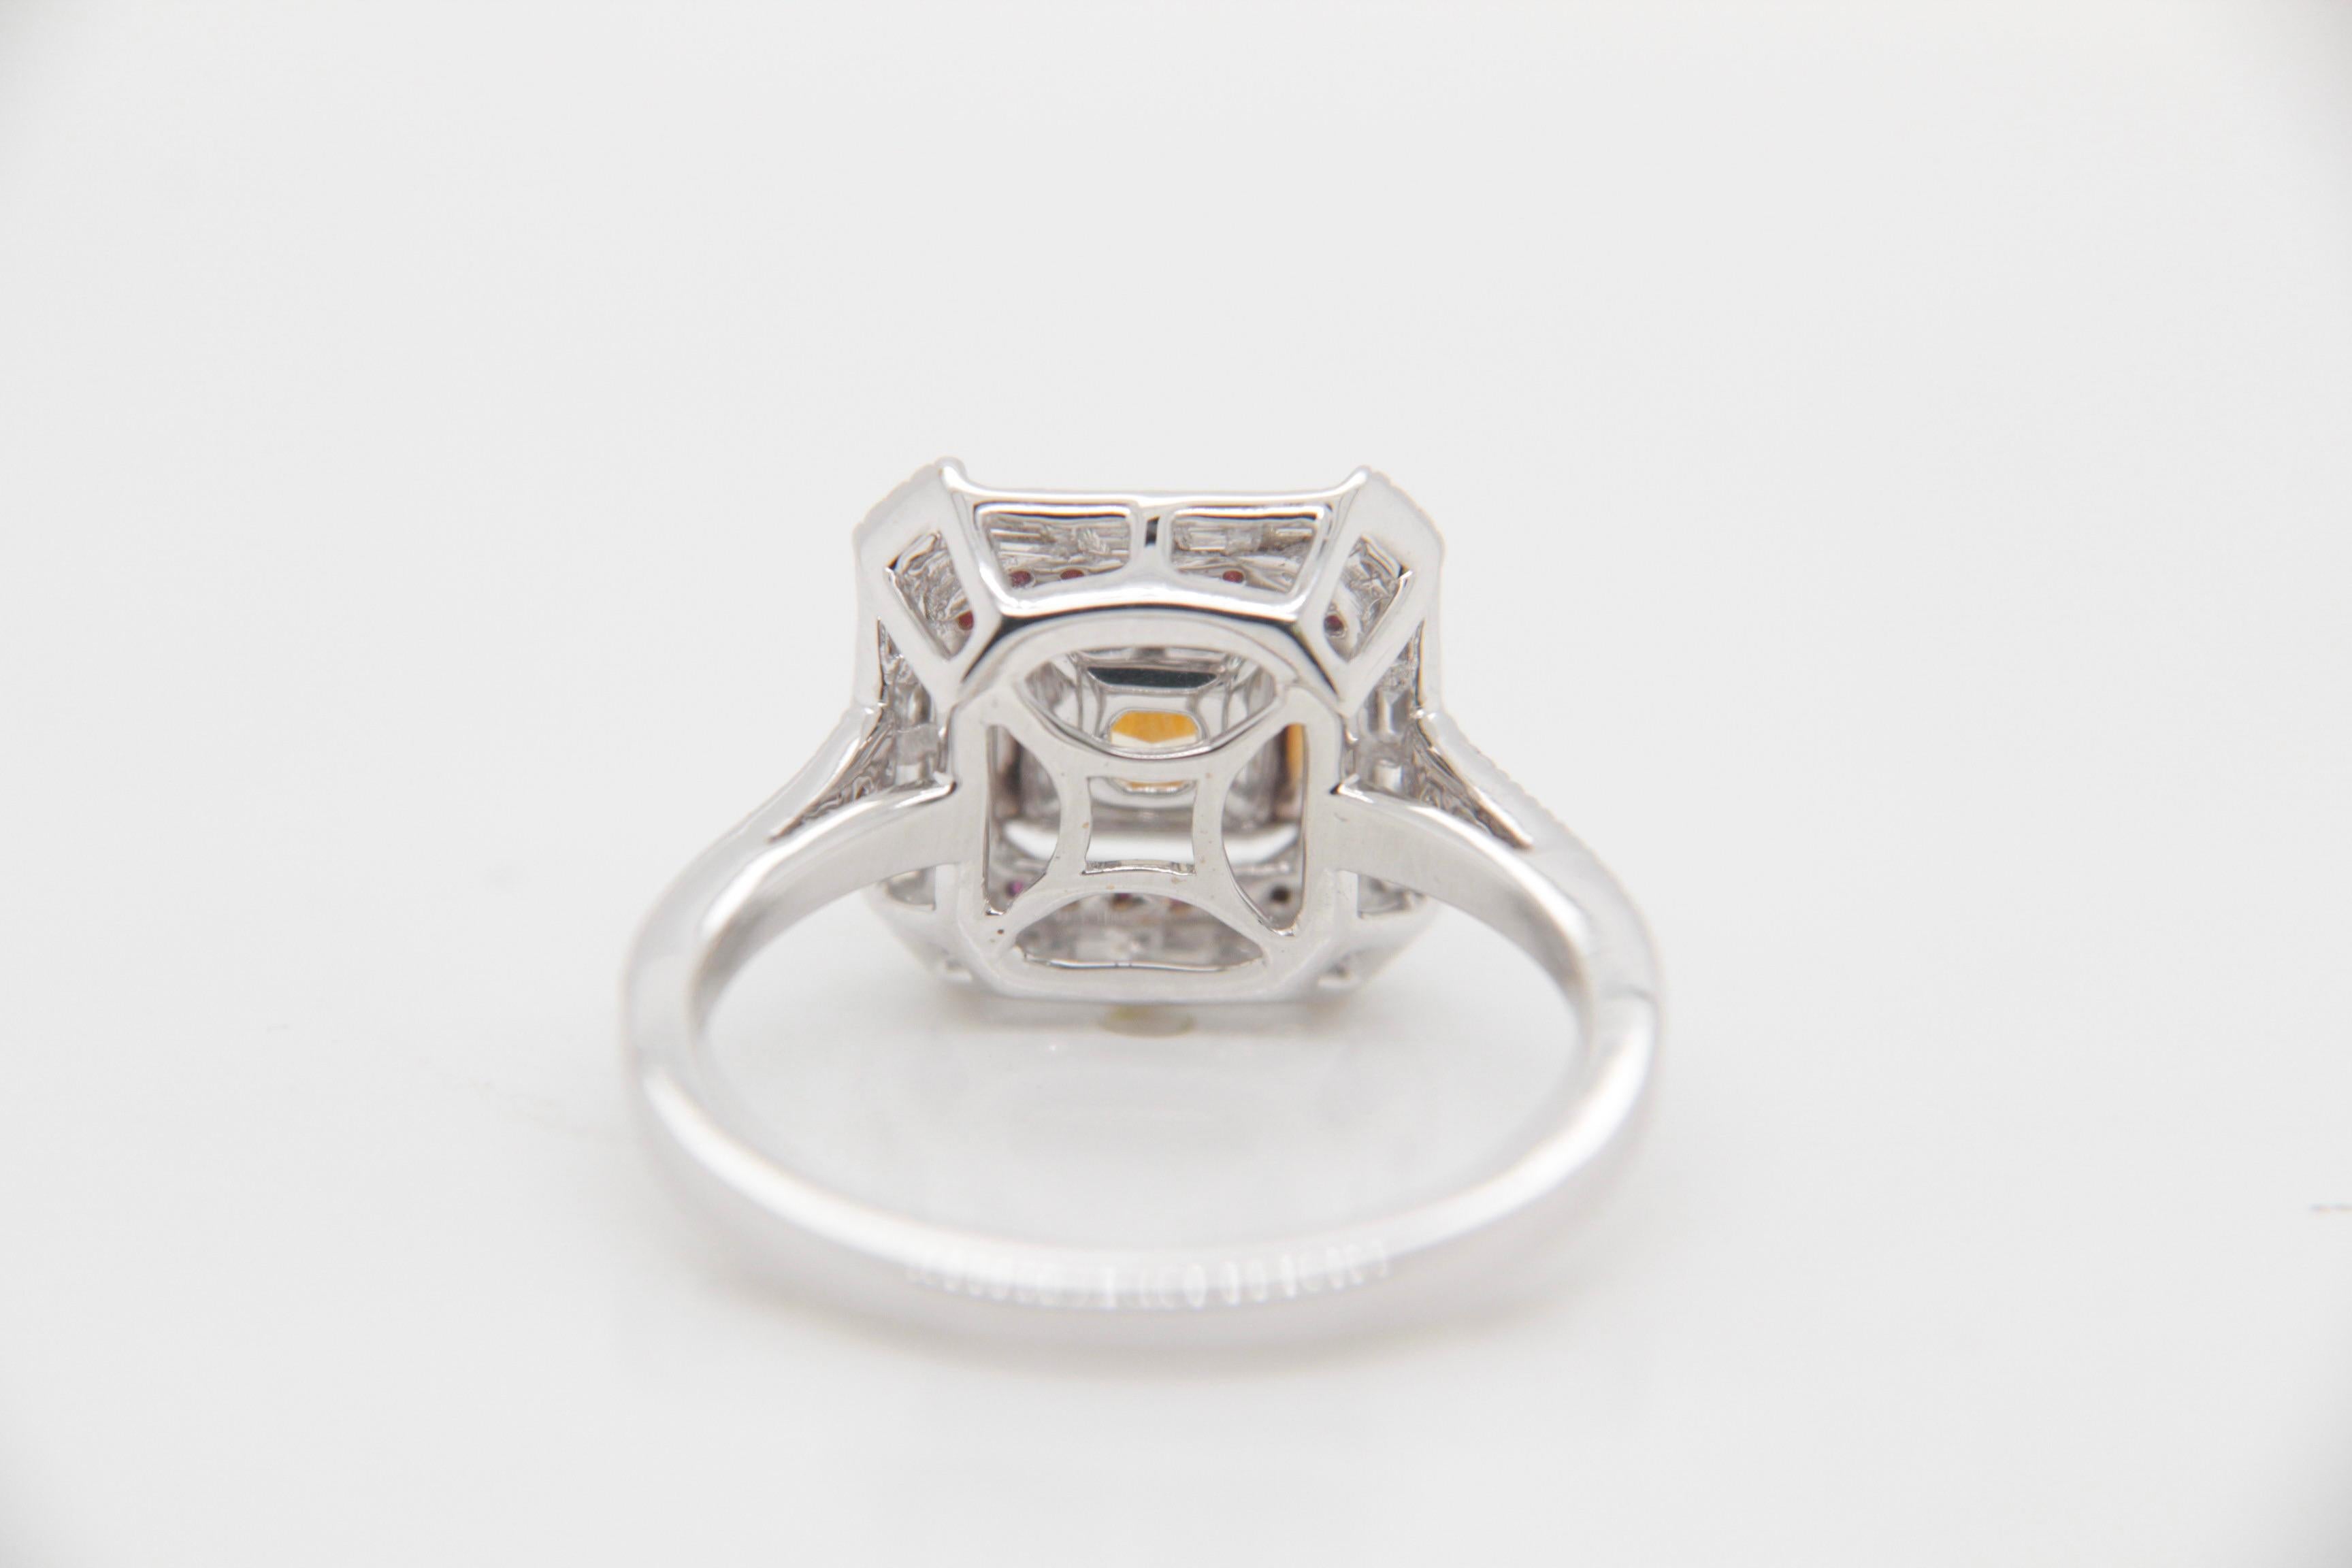 Radiant Cut GIA Certified 1.78 Carat Fancy Light Yellow Diamond Ring in 18K Gold For Sale